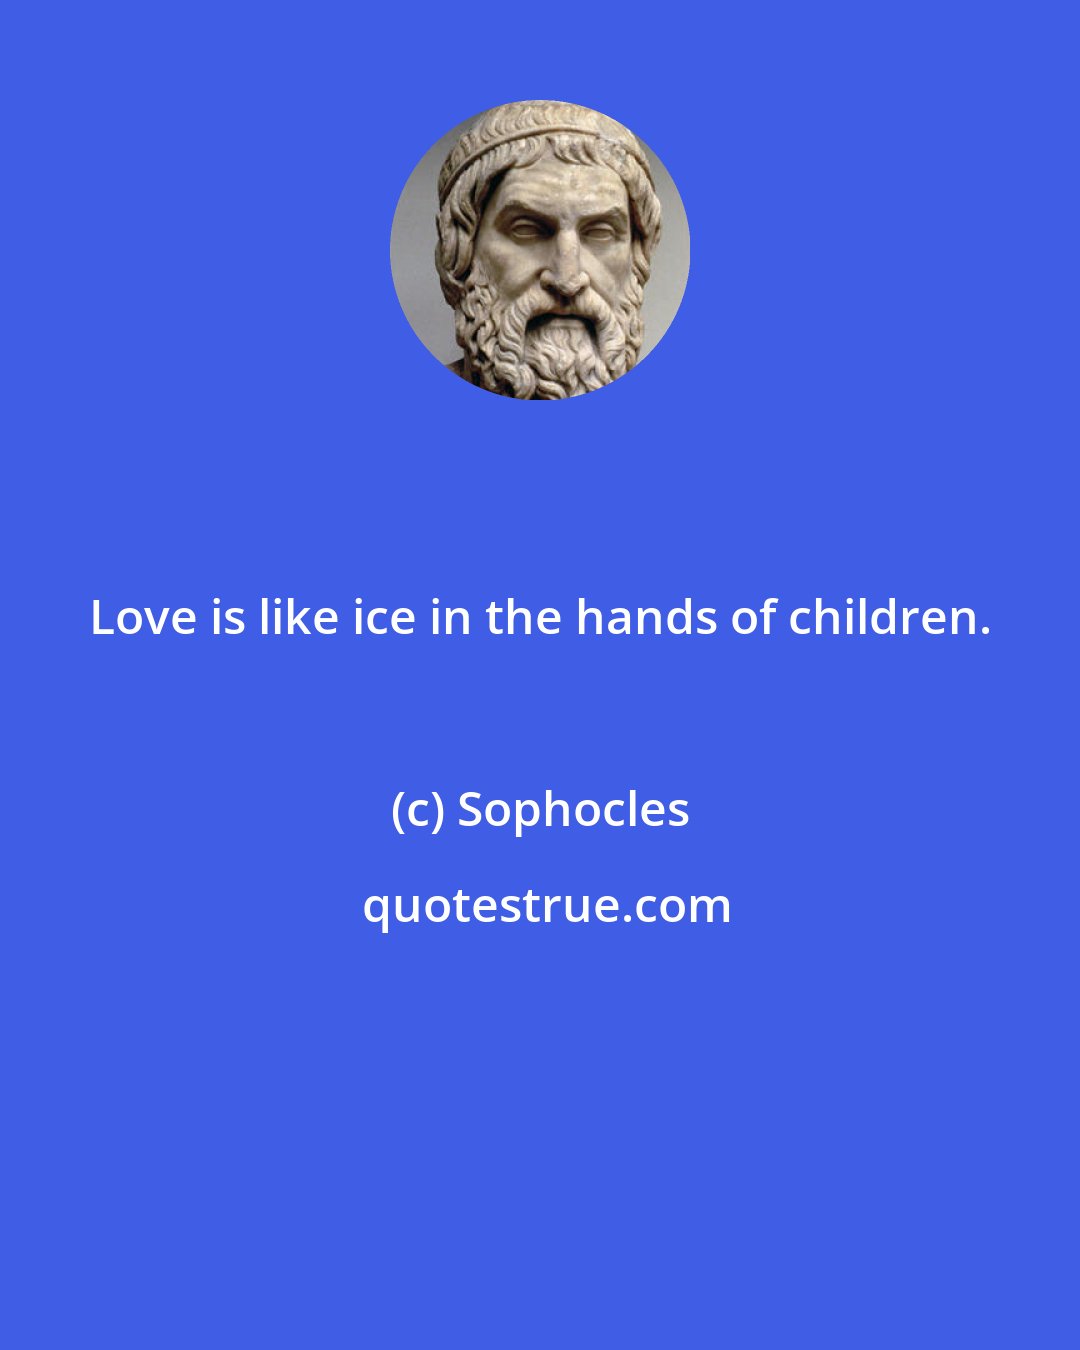 Sophocles: Love is like ice in the hands of children.